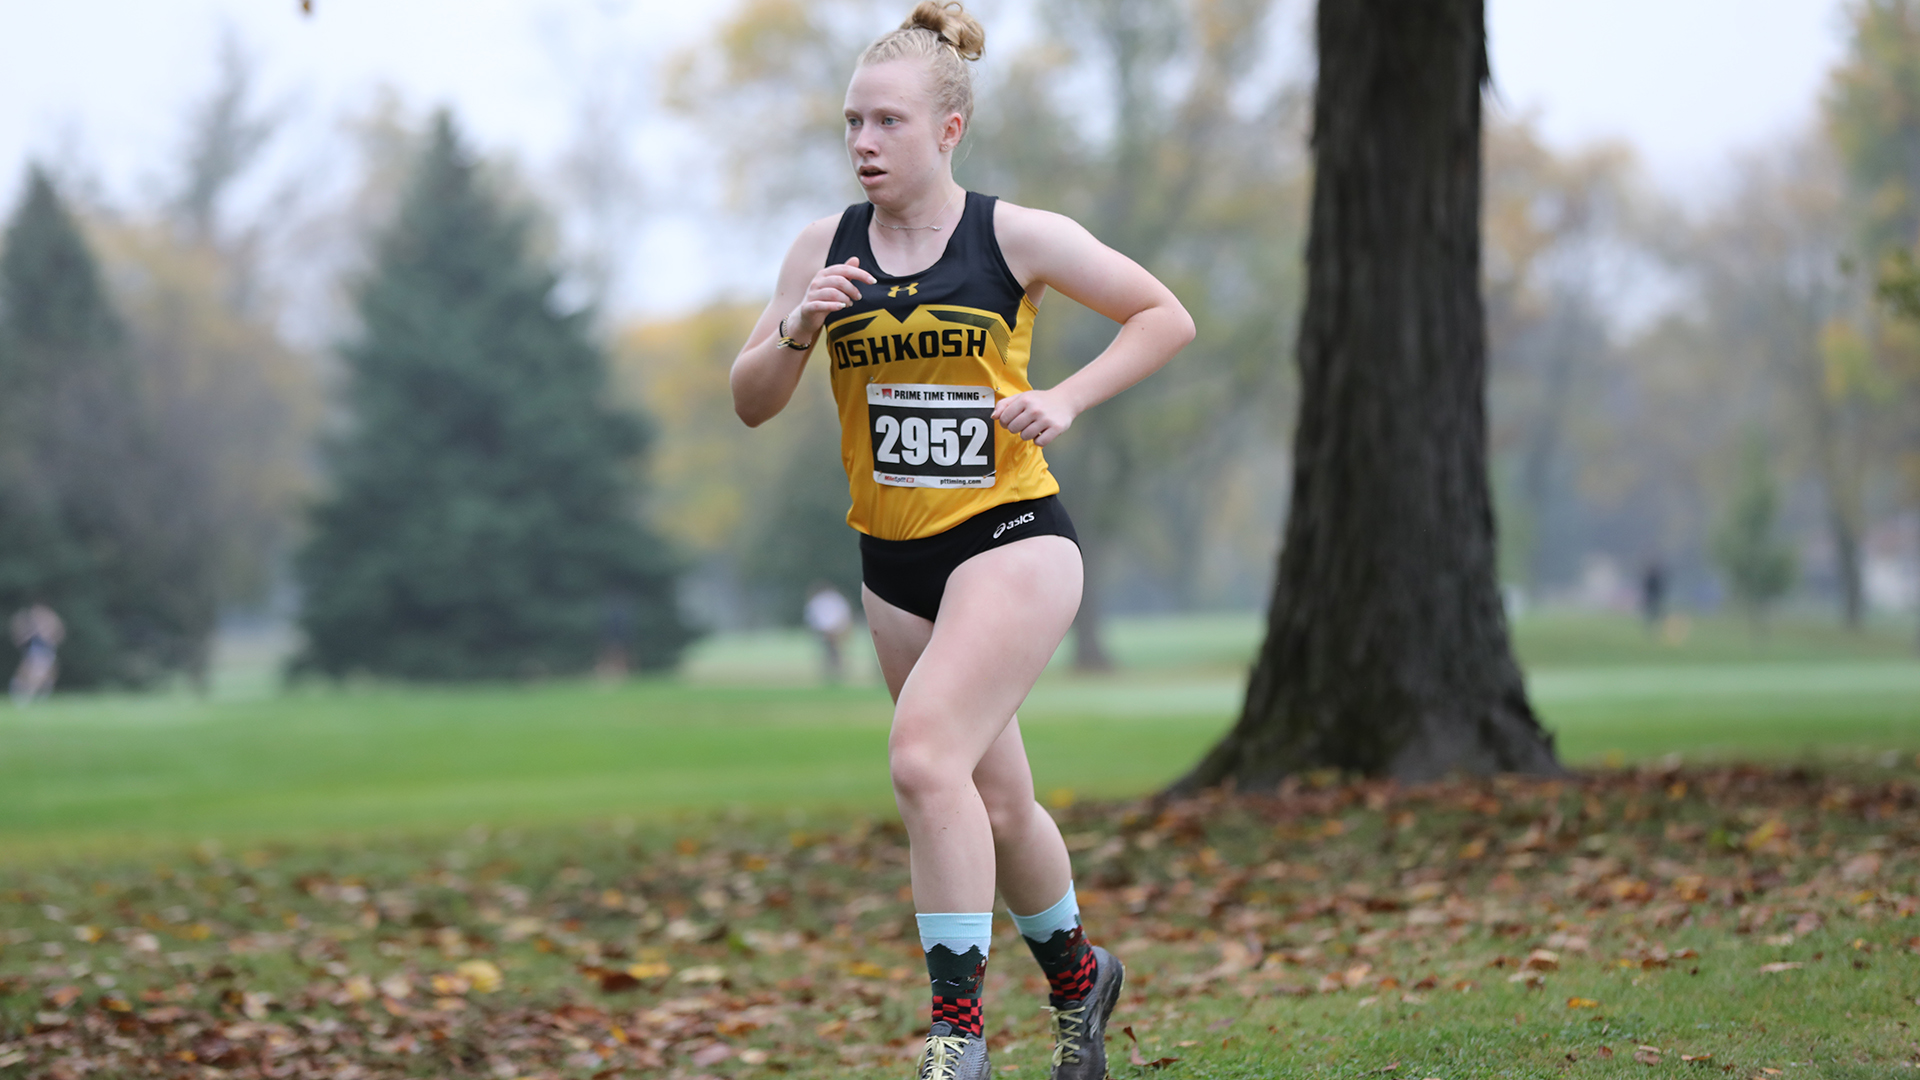 Lauren Urban led UW-Oshkosh's six runners at the Ripon College Red Hawk Open with her sixth-place finish.